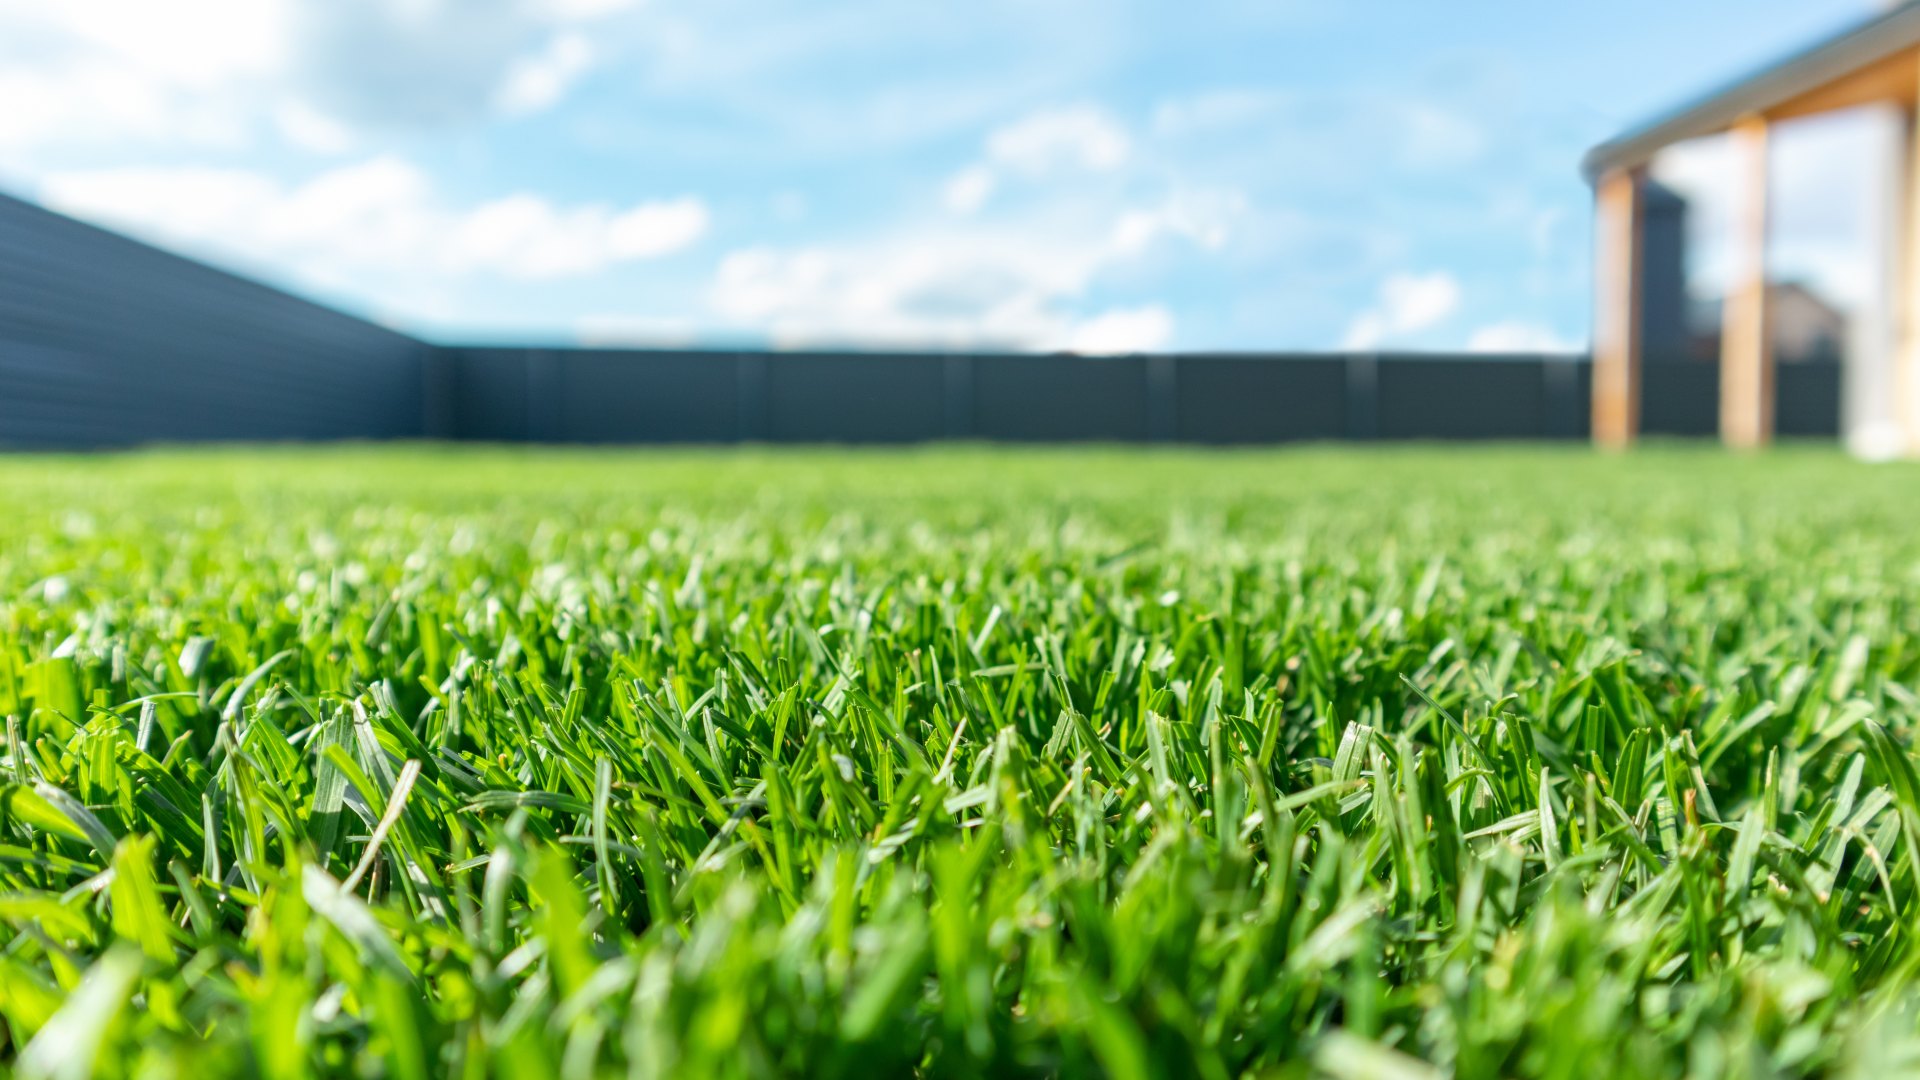 Does Your Lawn in Calgary Need a Summer Fertilization Treatment?